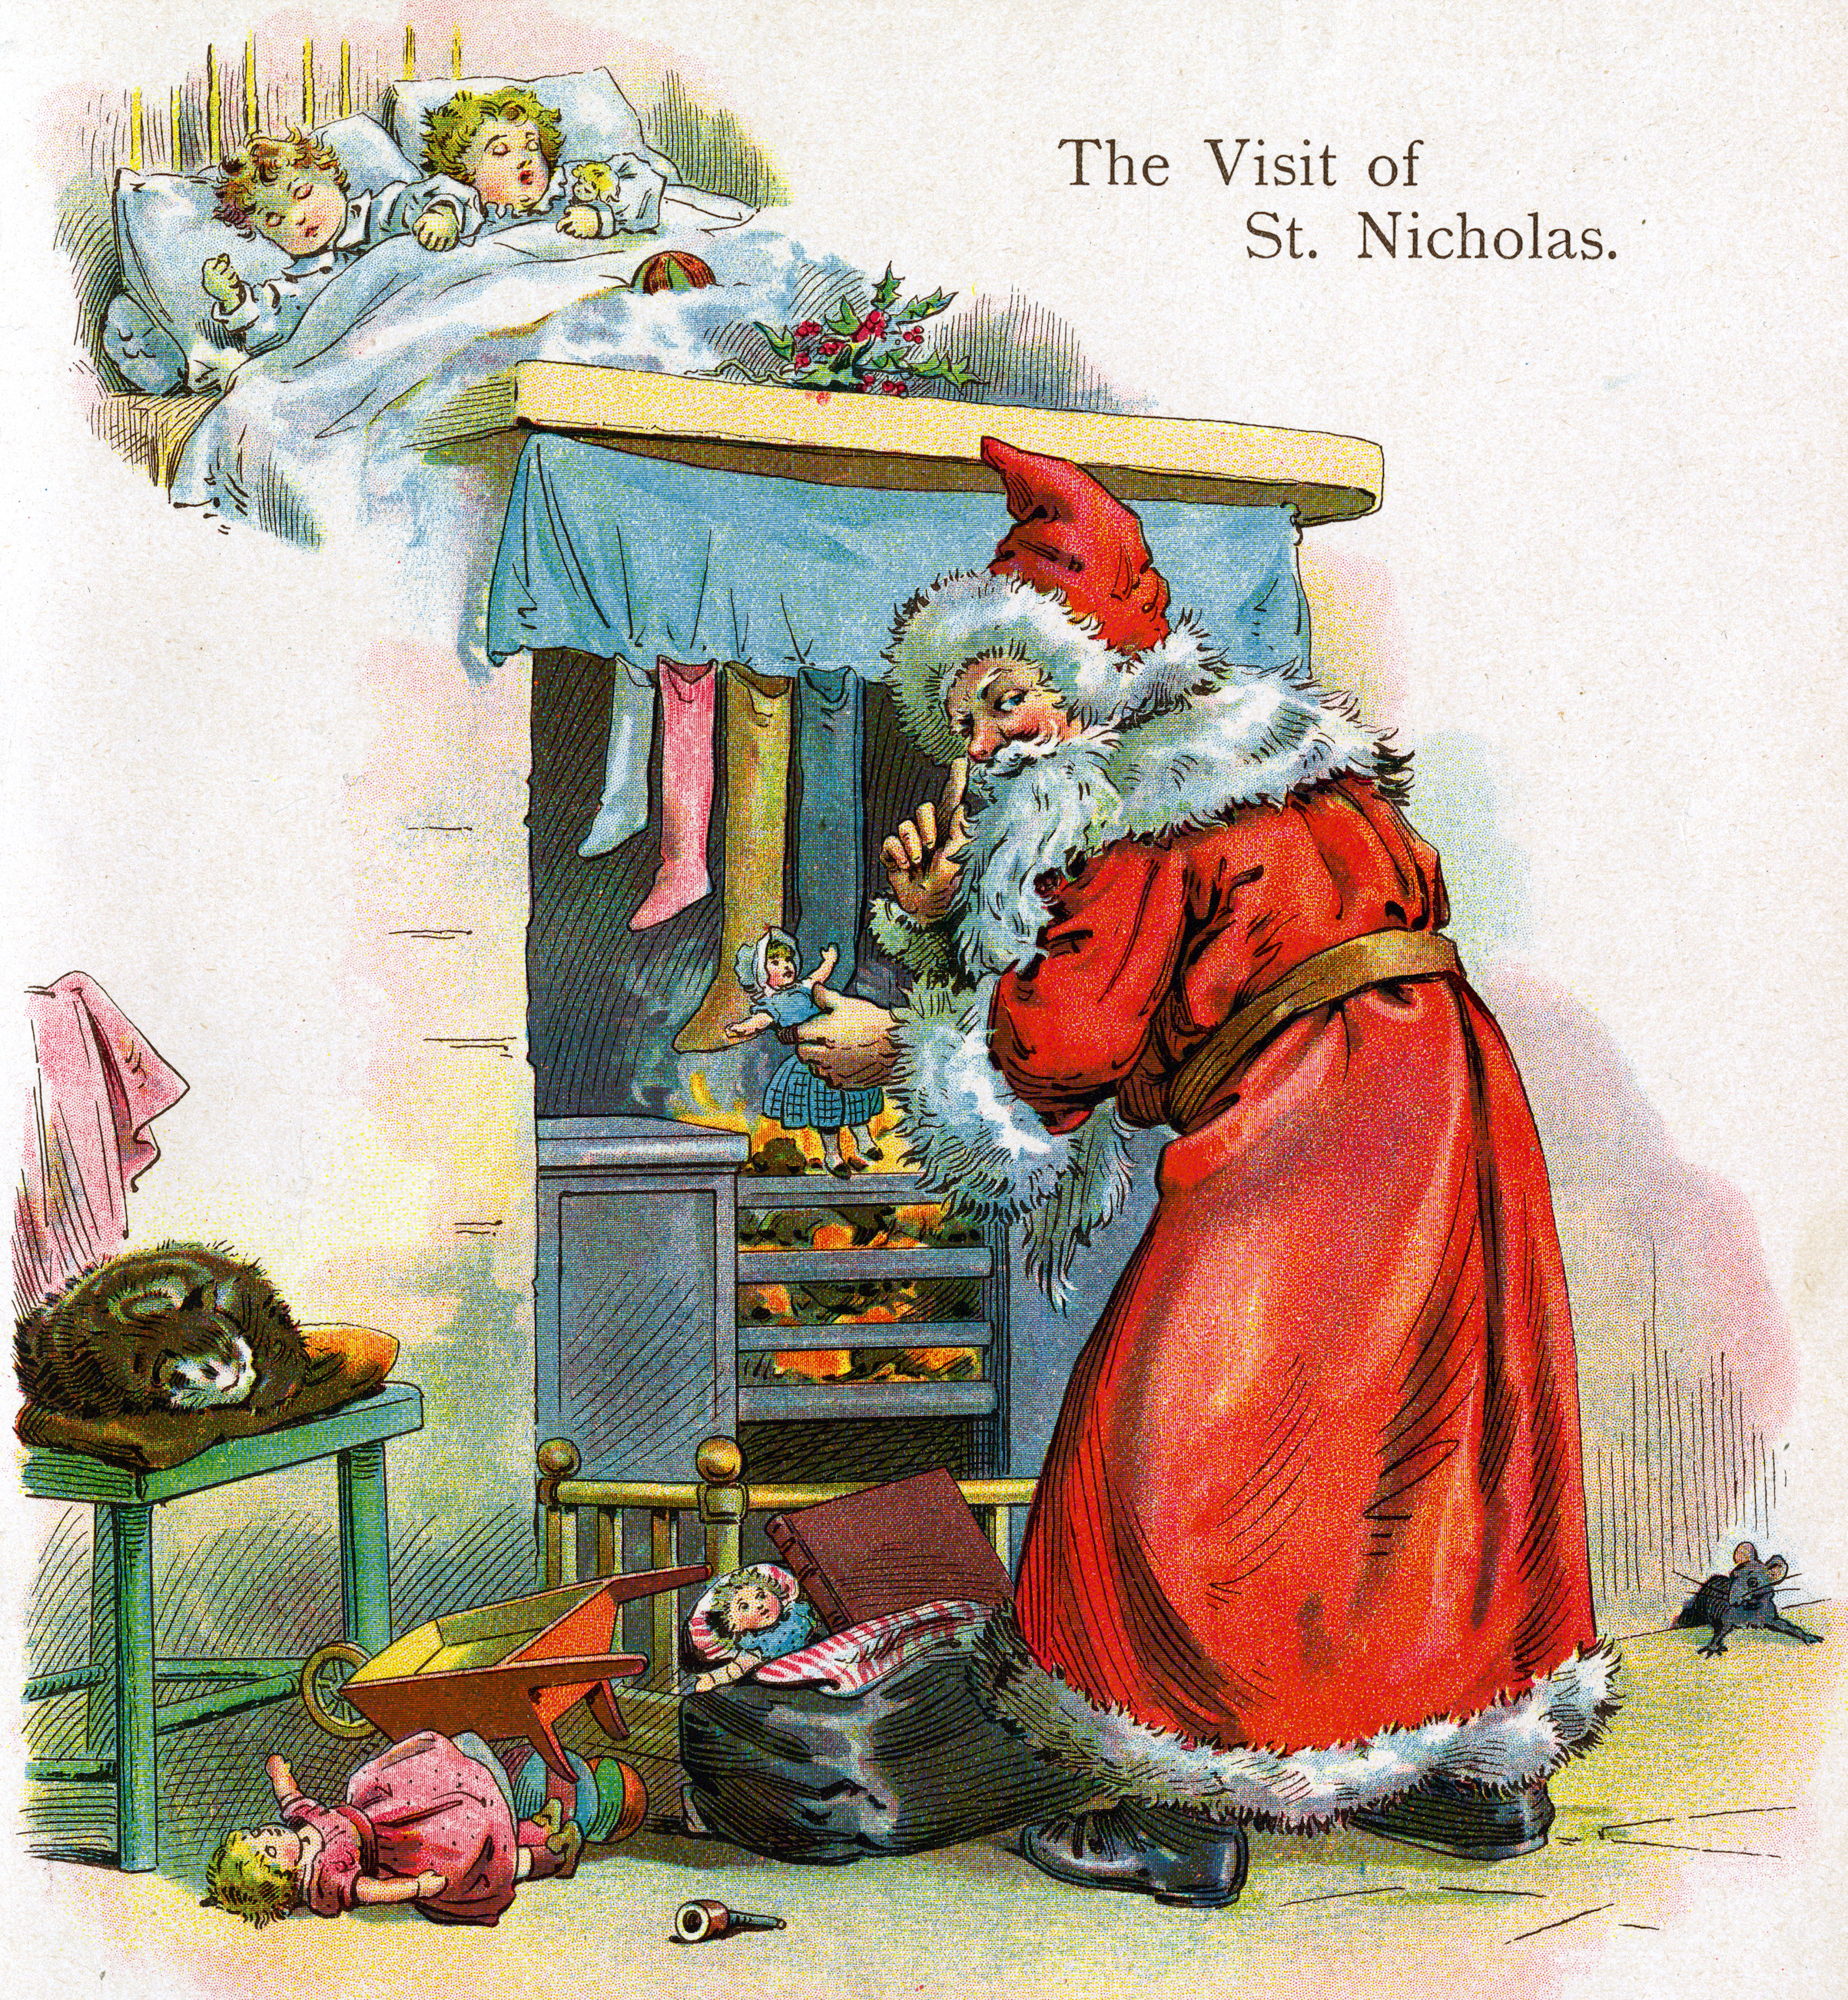 A lithographic book plate from one of McLoughlin's Christmas books shows Santa Claus by the chimney and was published in New York City in 1895. (Transcendental Graphics / Getty Images)